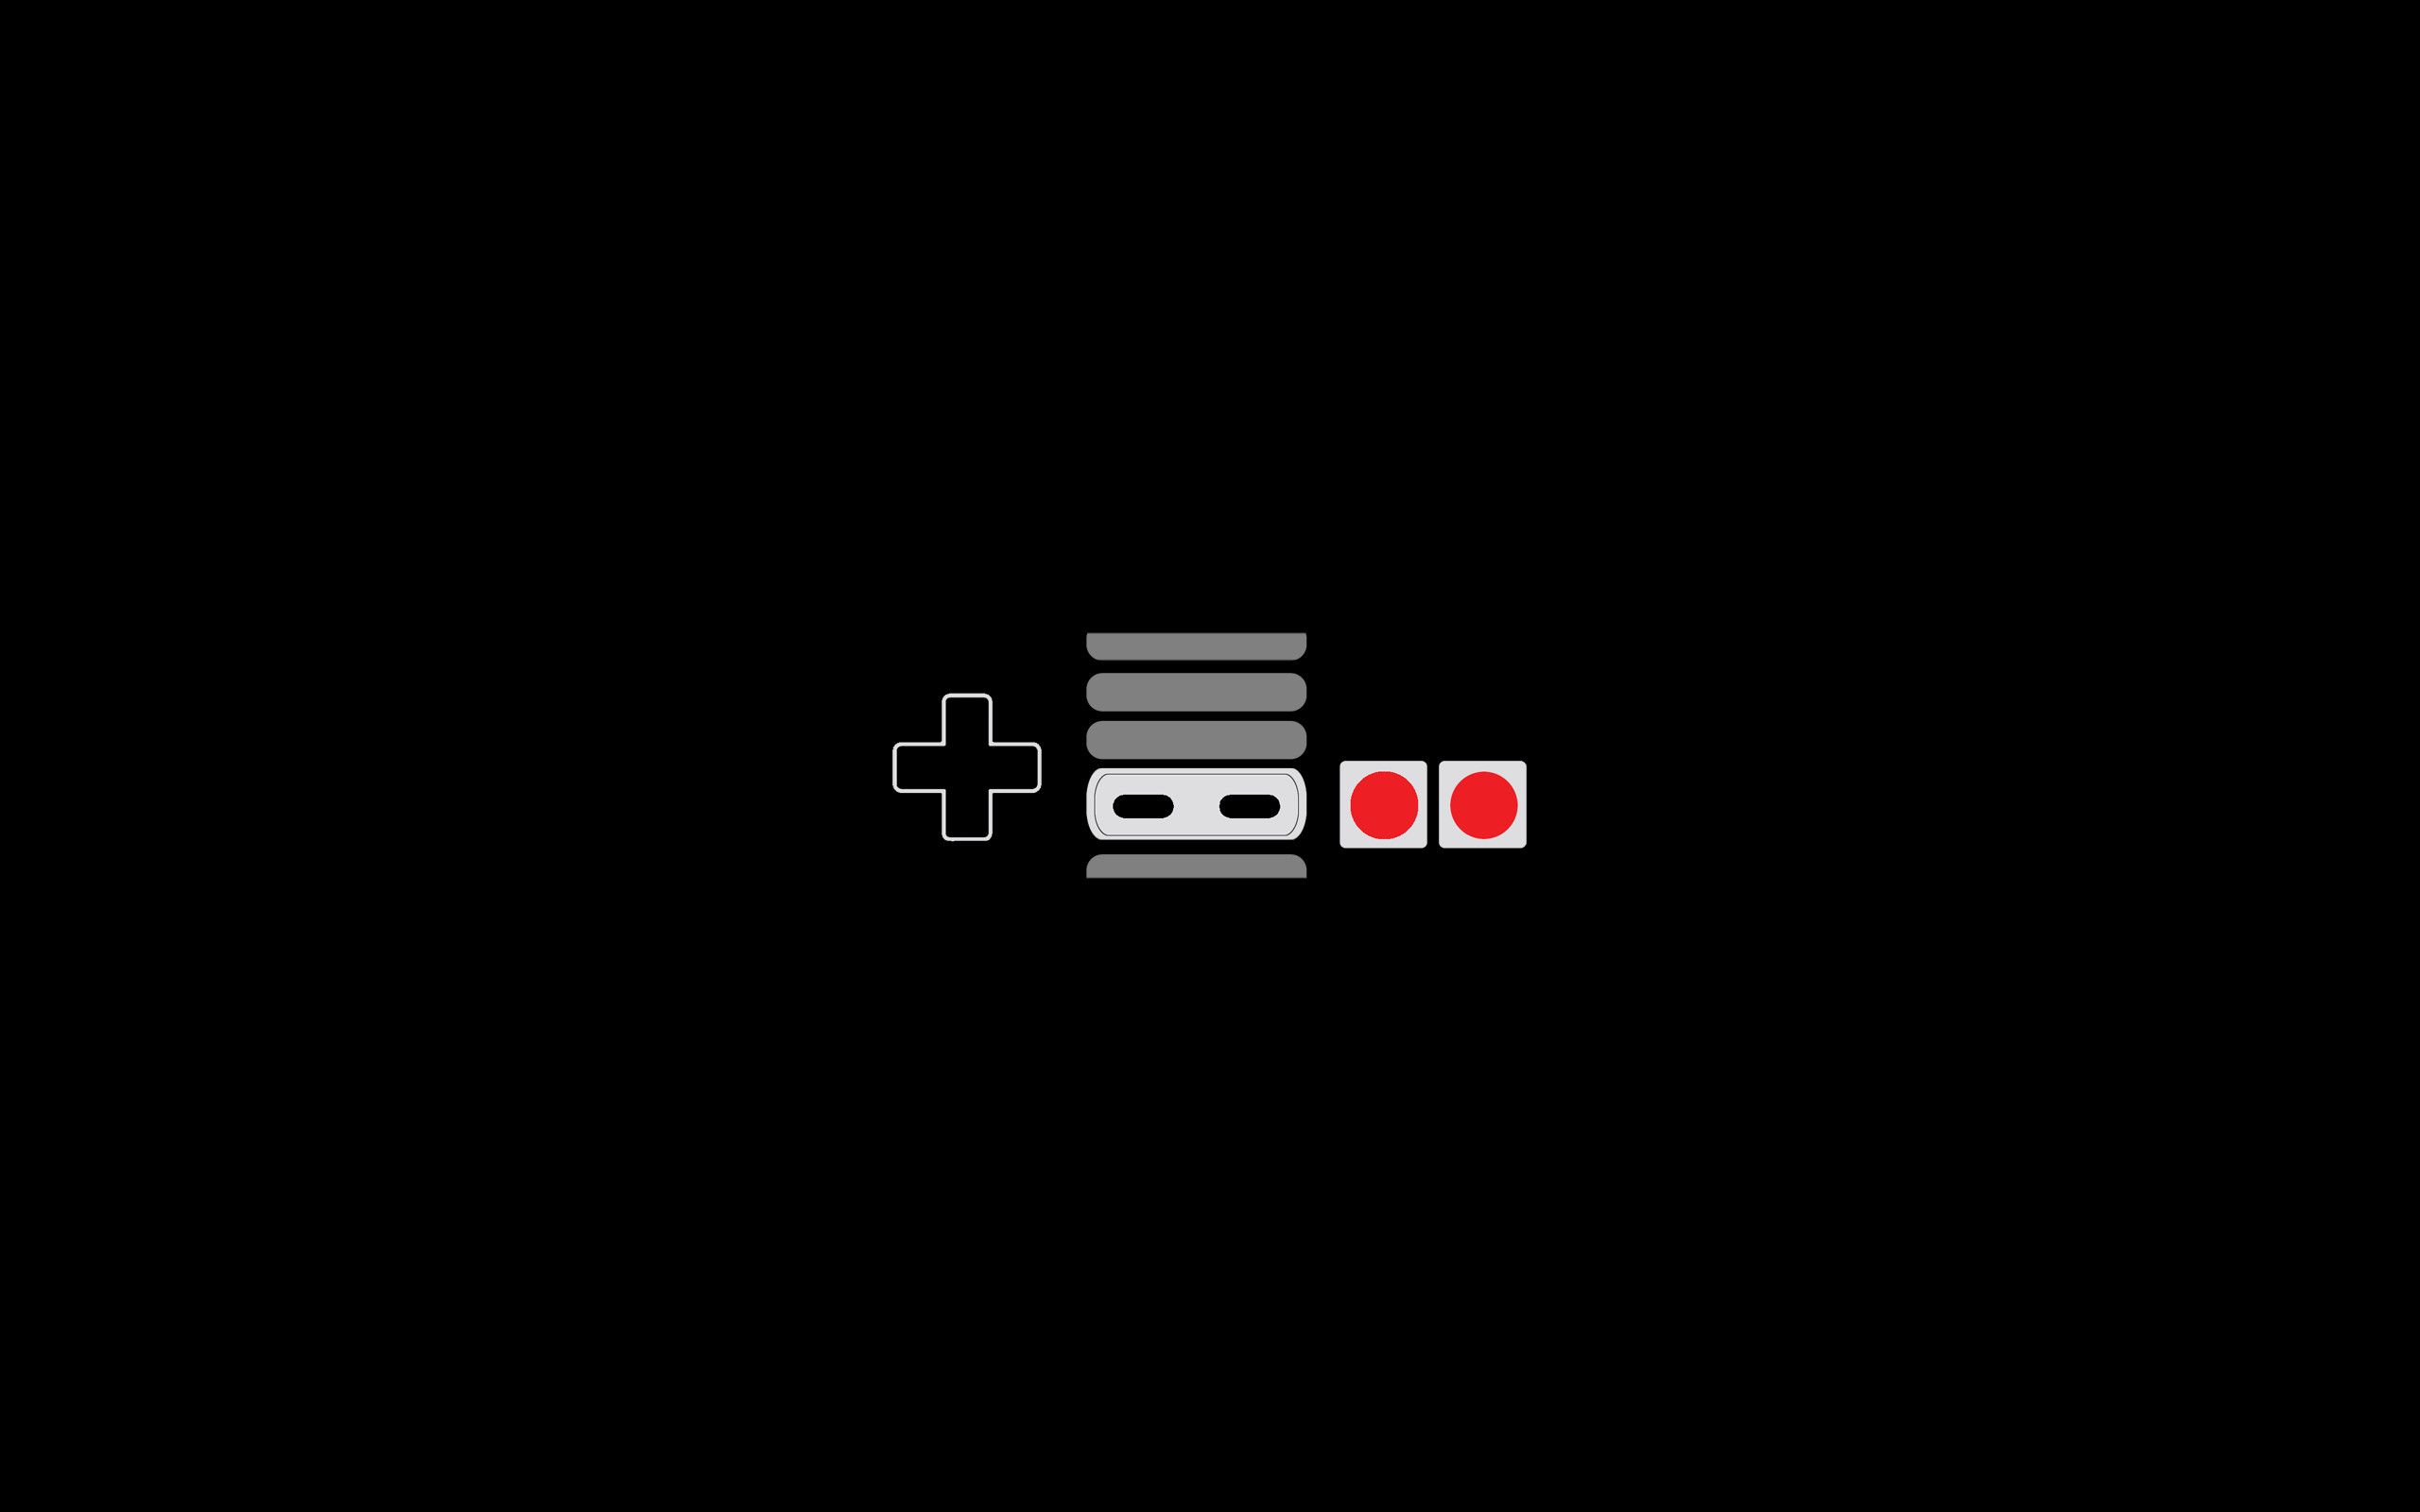 A black background with the word plus on it - Nintendo